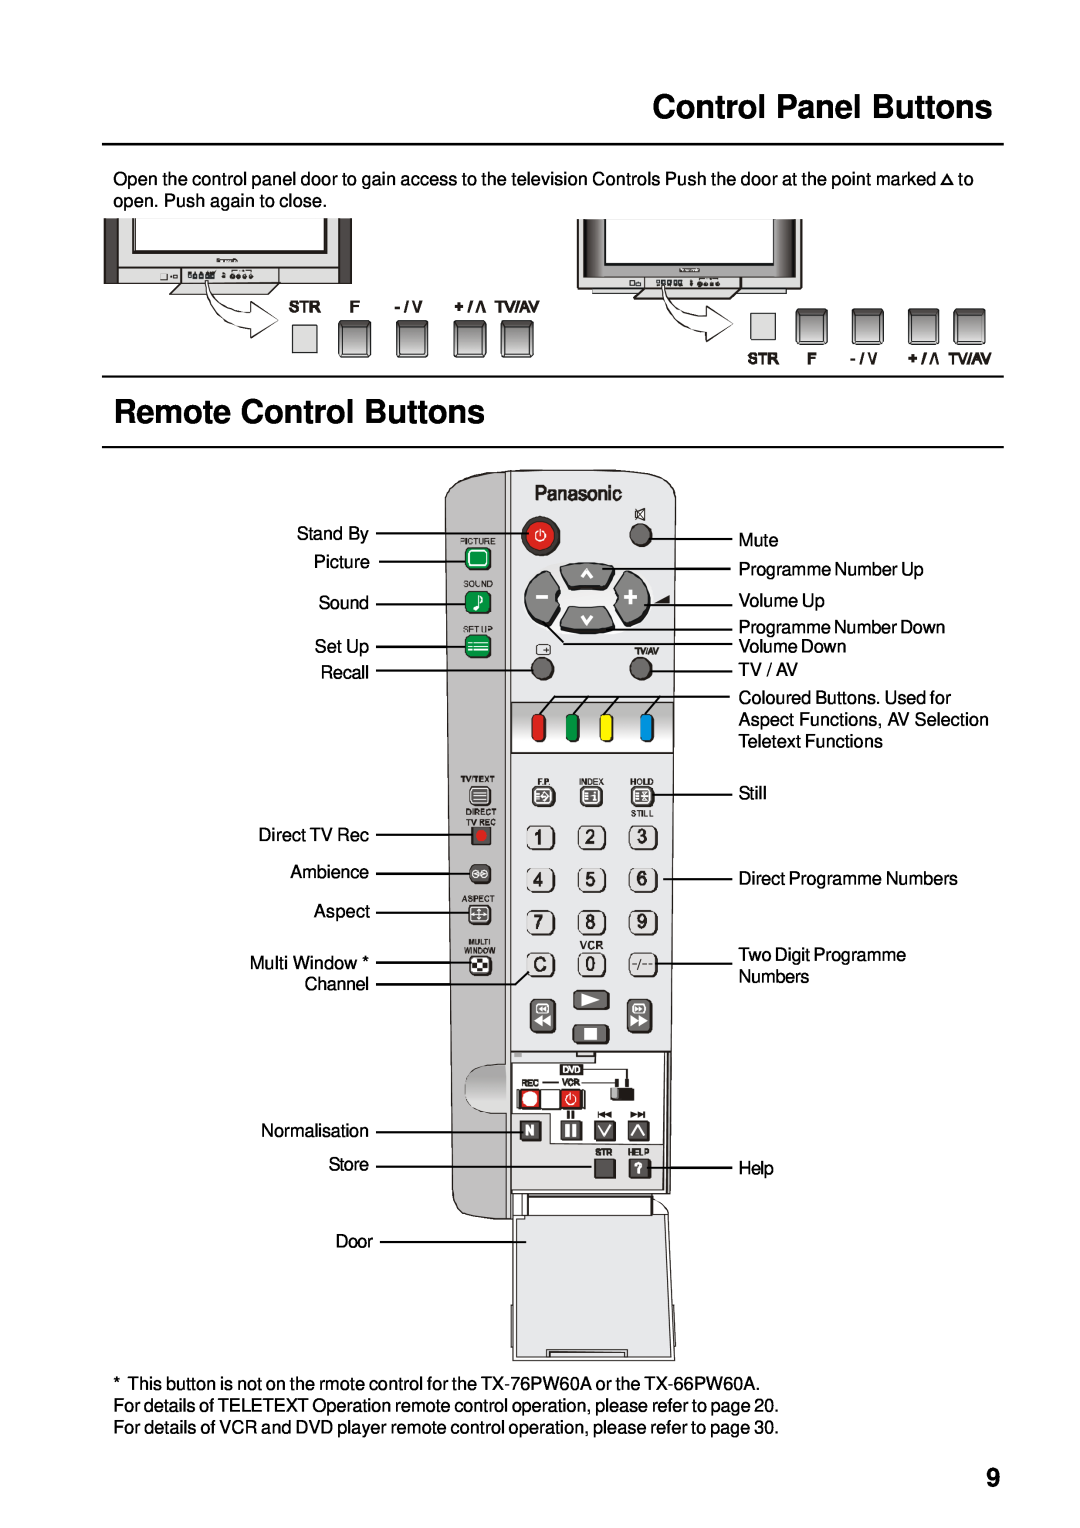 Panasonic TX-76PW60A, TX-86PW155A, TX-76PW155A, TX-66PW60A instruction manual Control Panel Buttons, Remote Control Buttons 